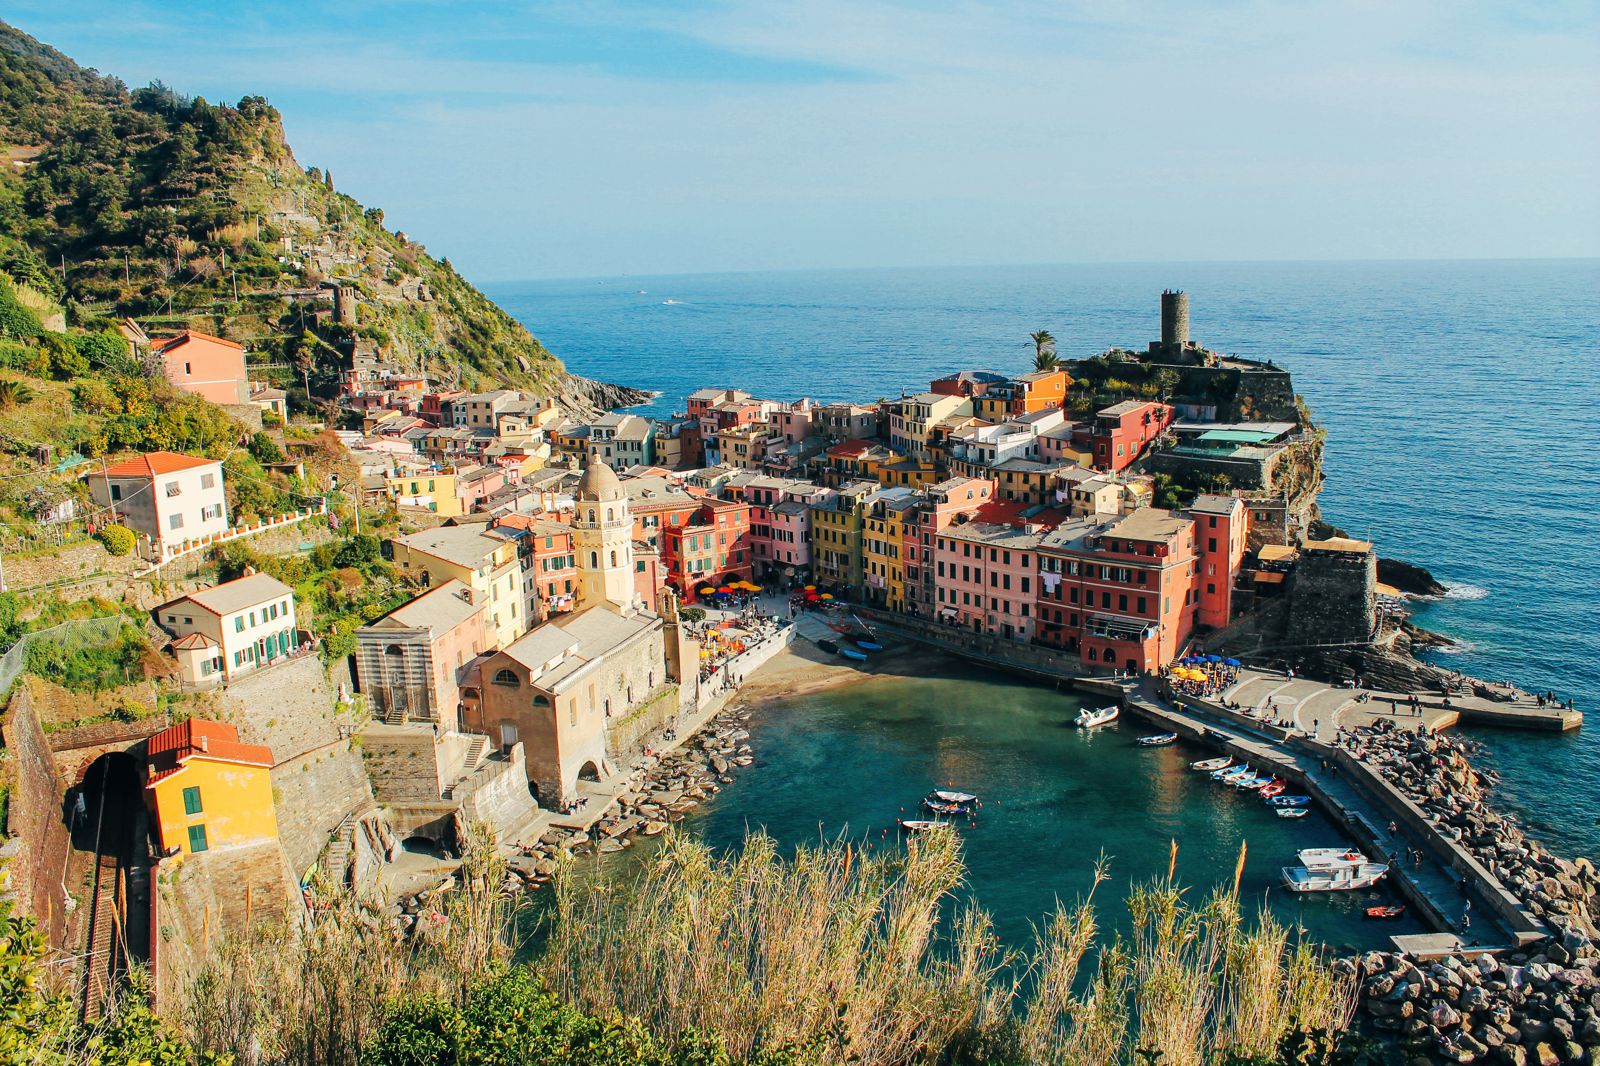 Vernazza in Cinque Terre, Italy - The Photo Diary! [4 of 5] - Hand